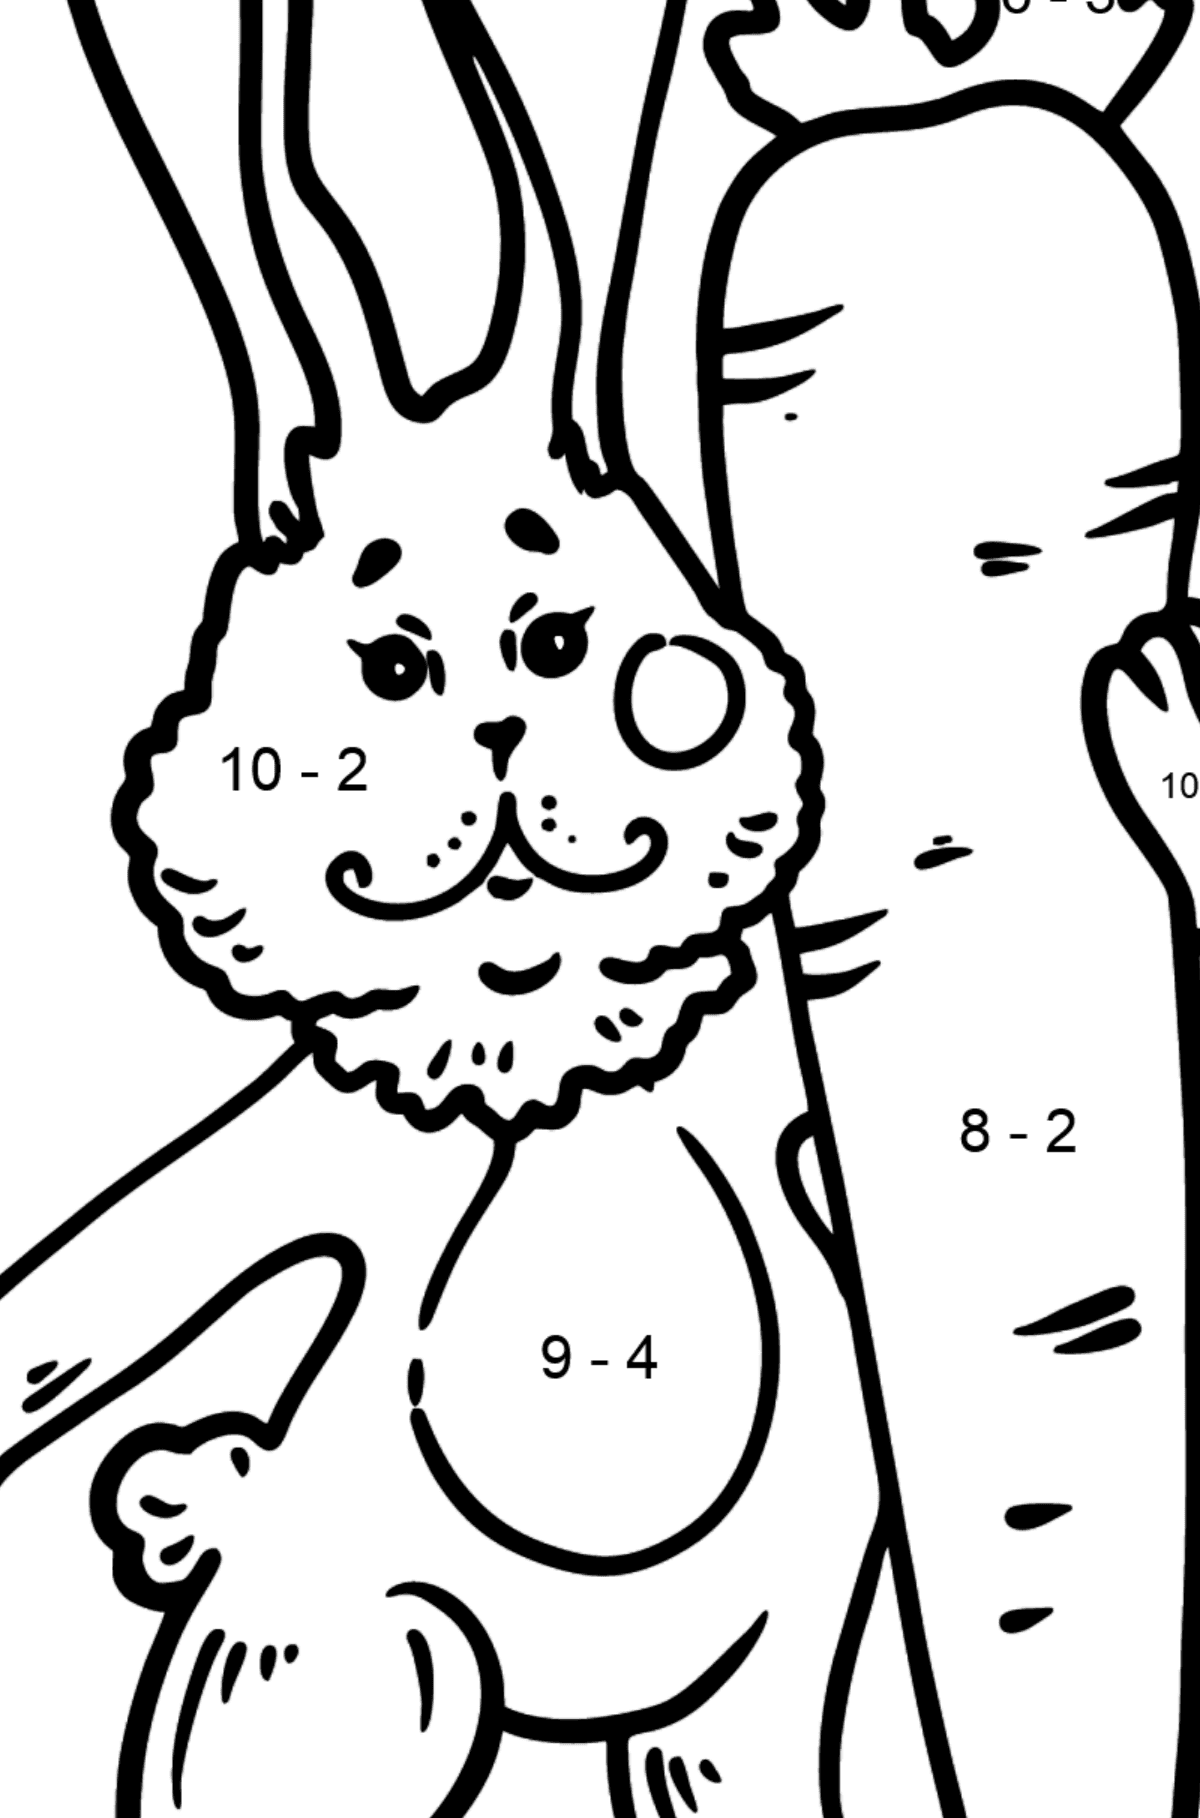 Bunny with Carrot coloring page - Math Coloring - Subtraction for Kids